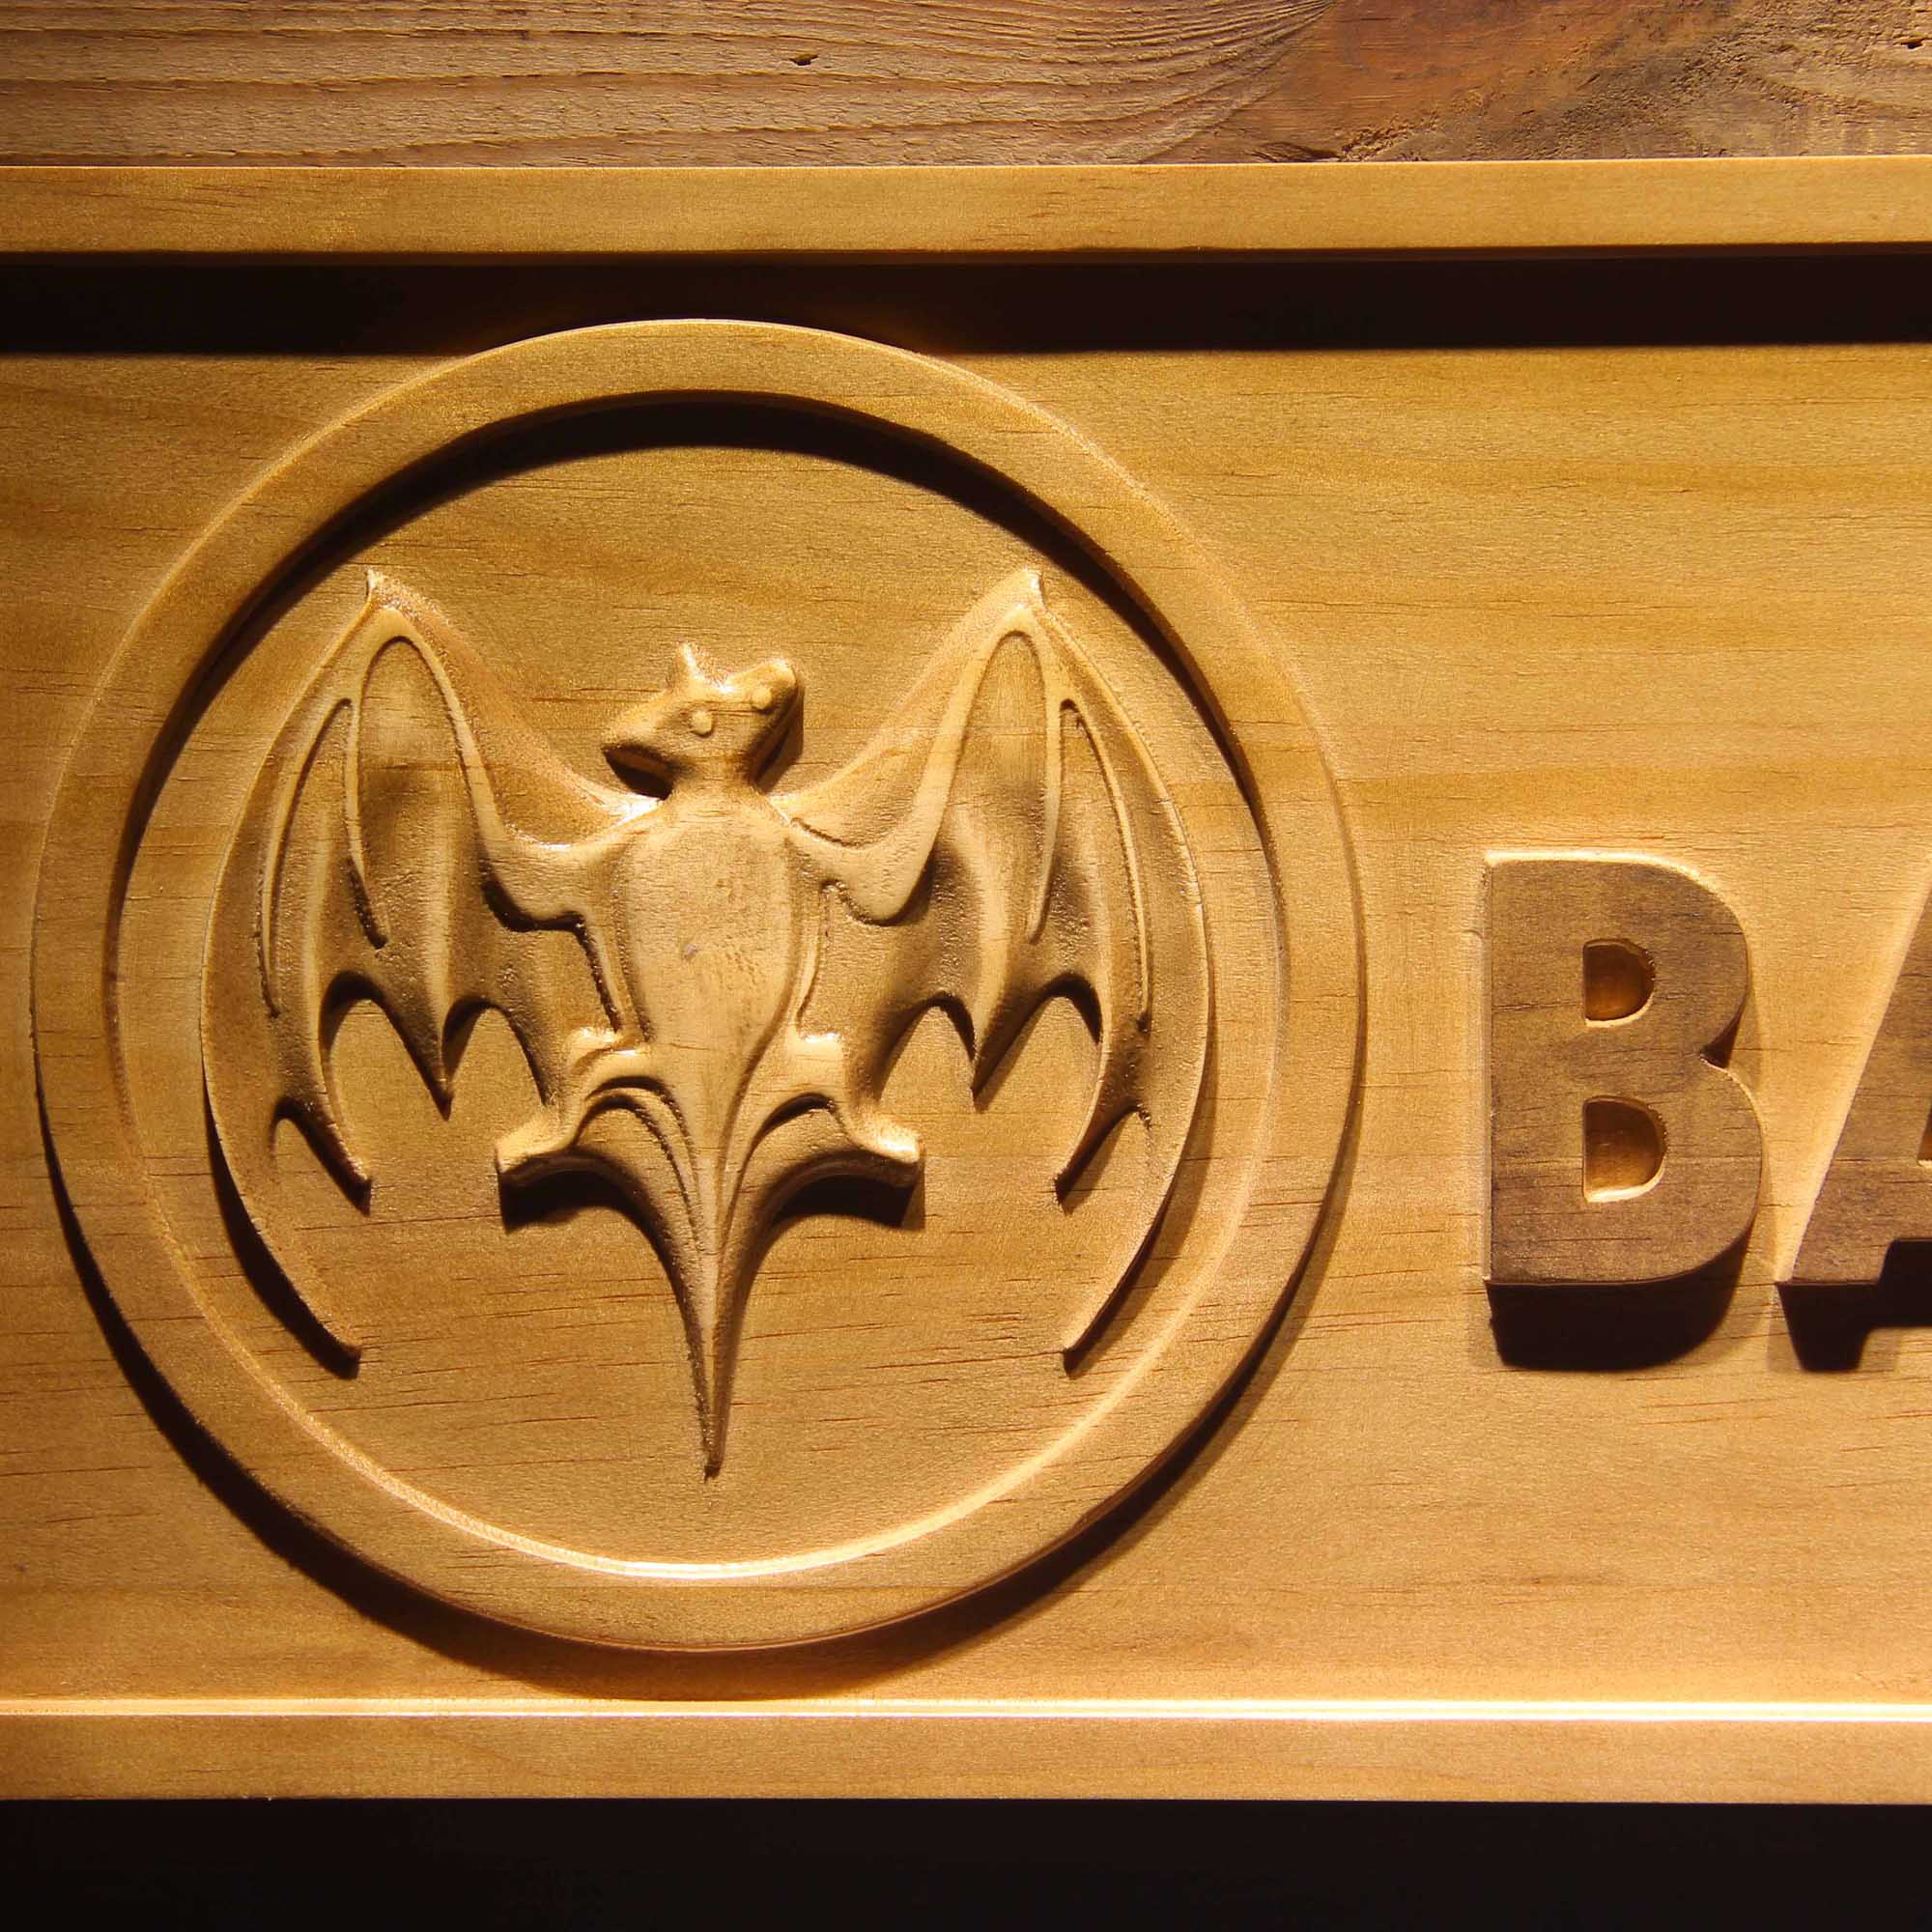 Bacardi Rum Wine 3D Wooden Engrave Sign